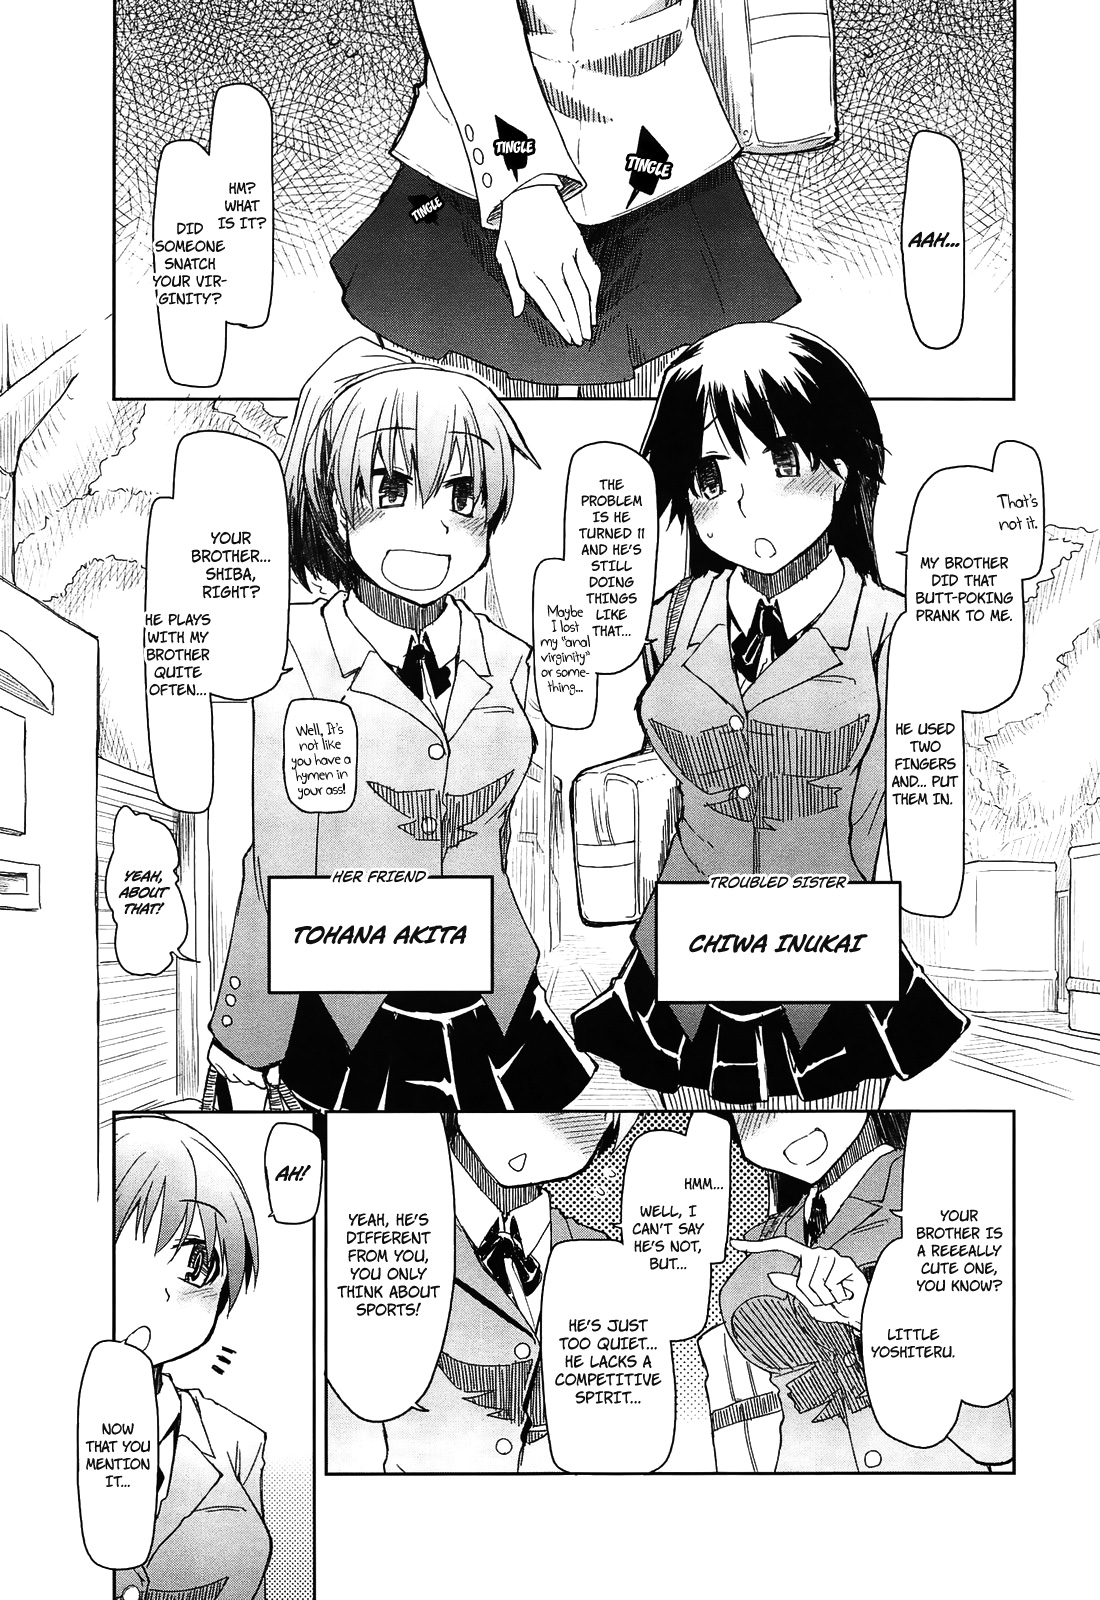 [Ryo] How To Eat Delicious Meat - Chapters 1 - 5 [English] =Anonymous + maipantsu + EroMangaGirls= page 16 full